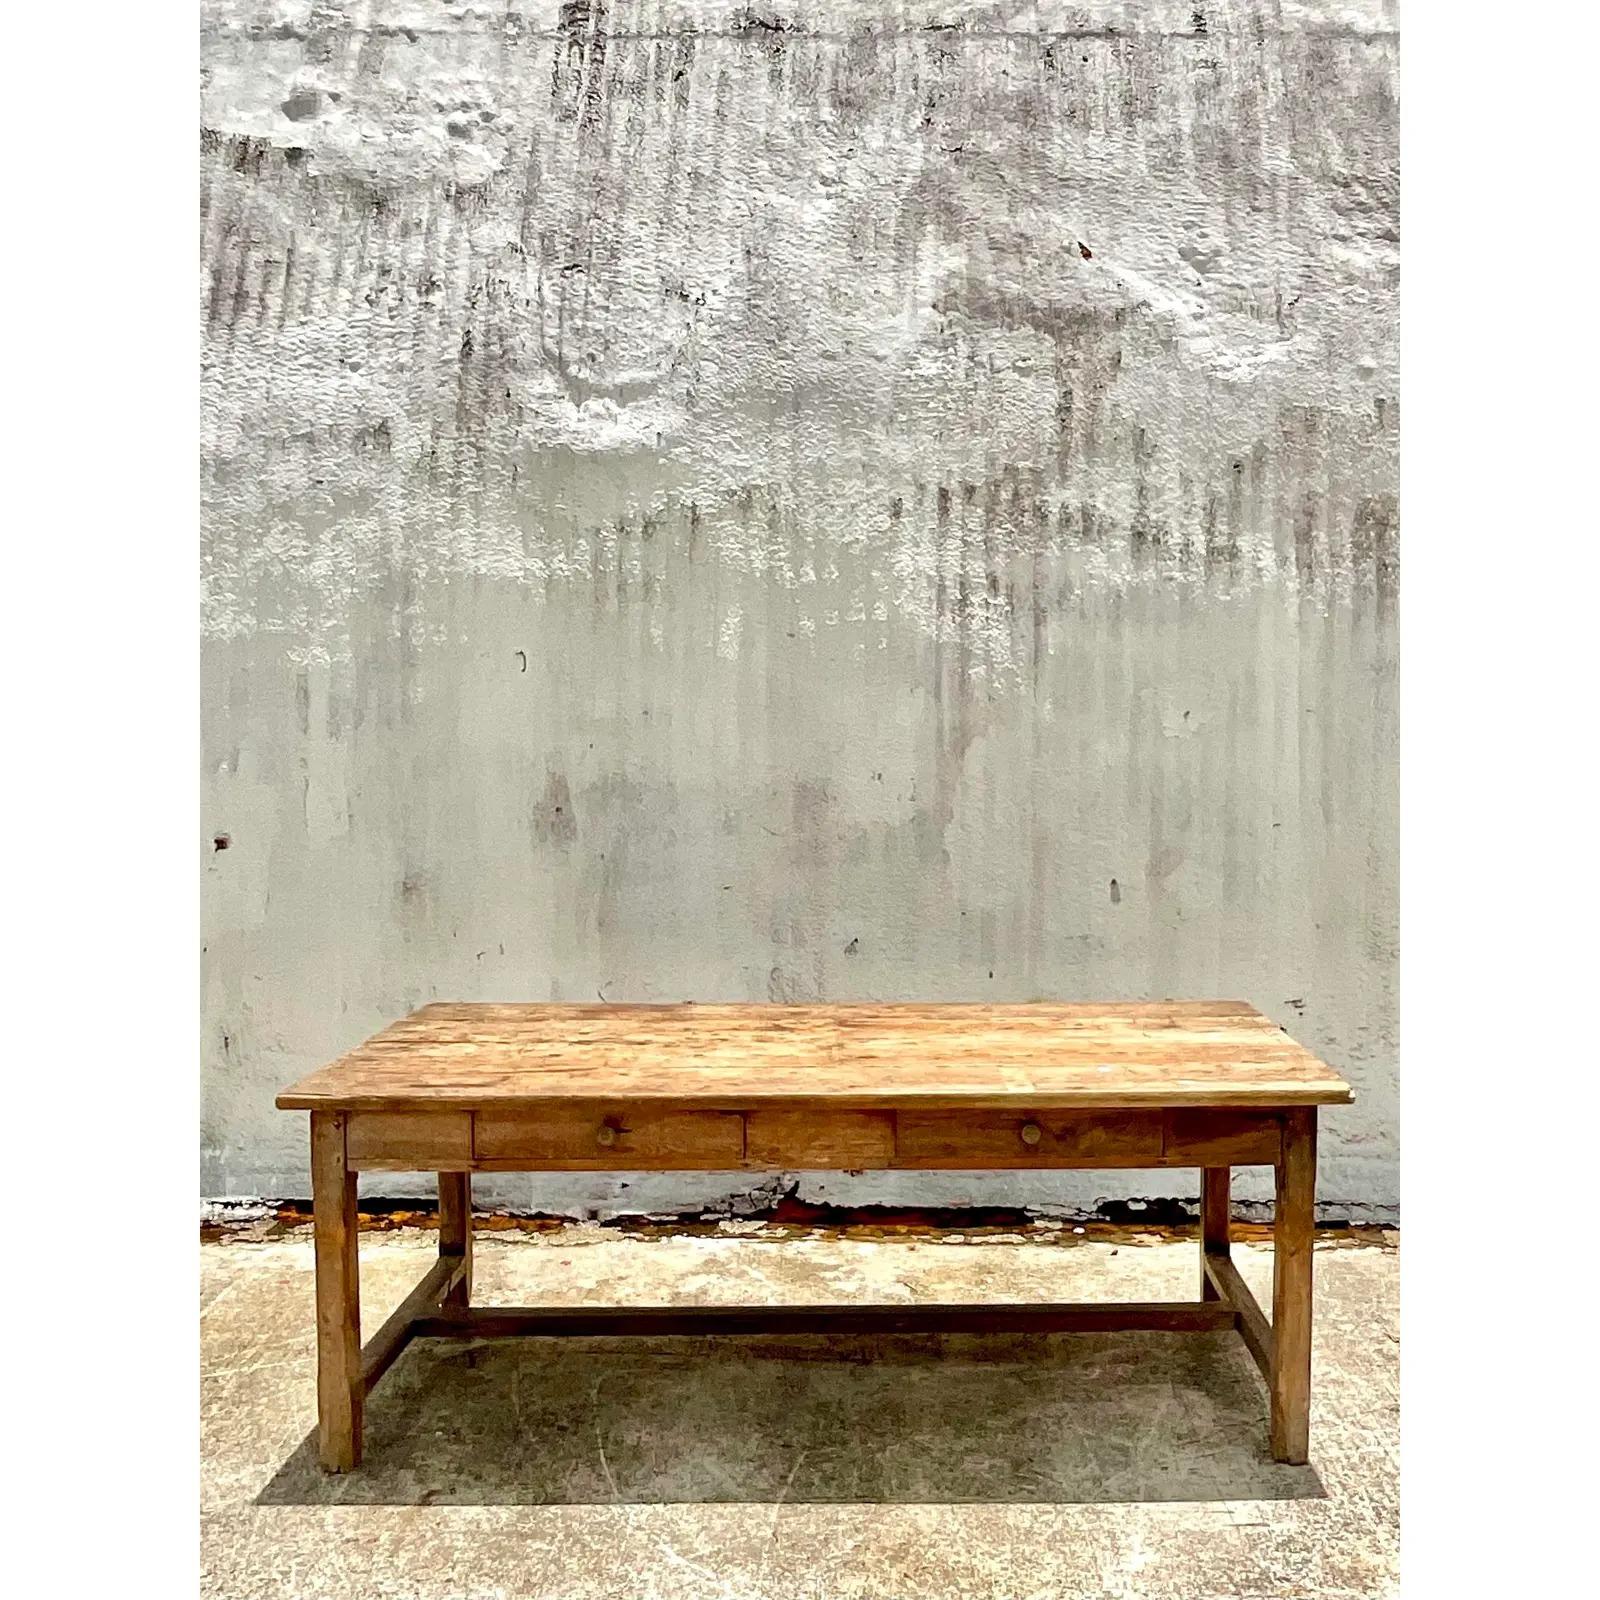 North American Vintage Rustic Distressed Farm Dining Table